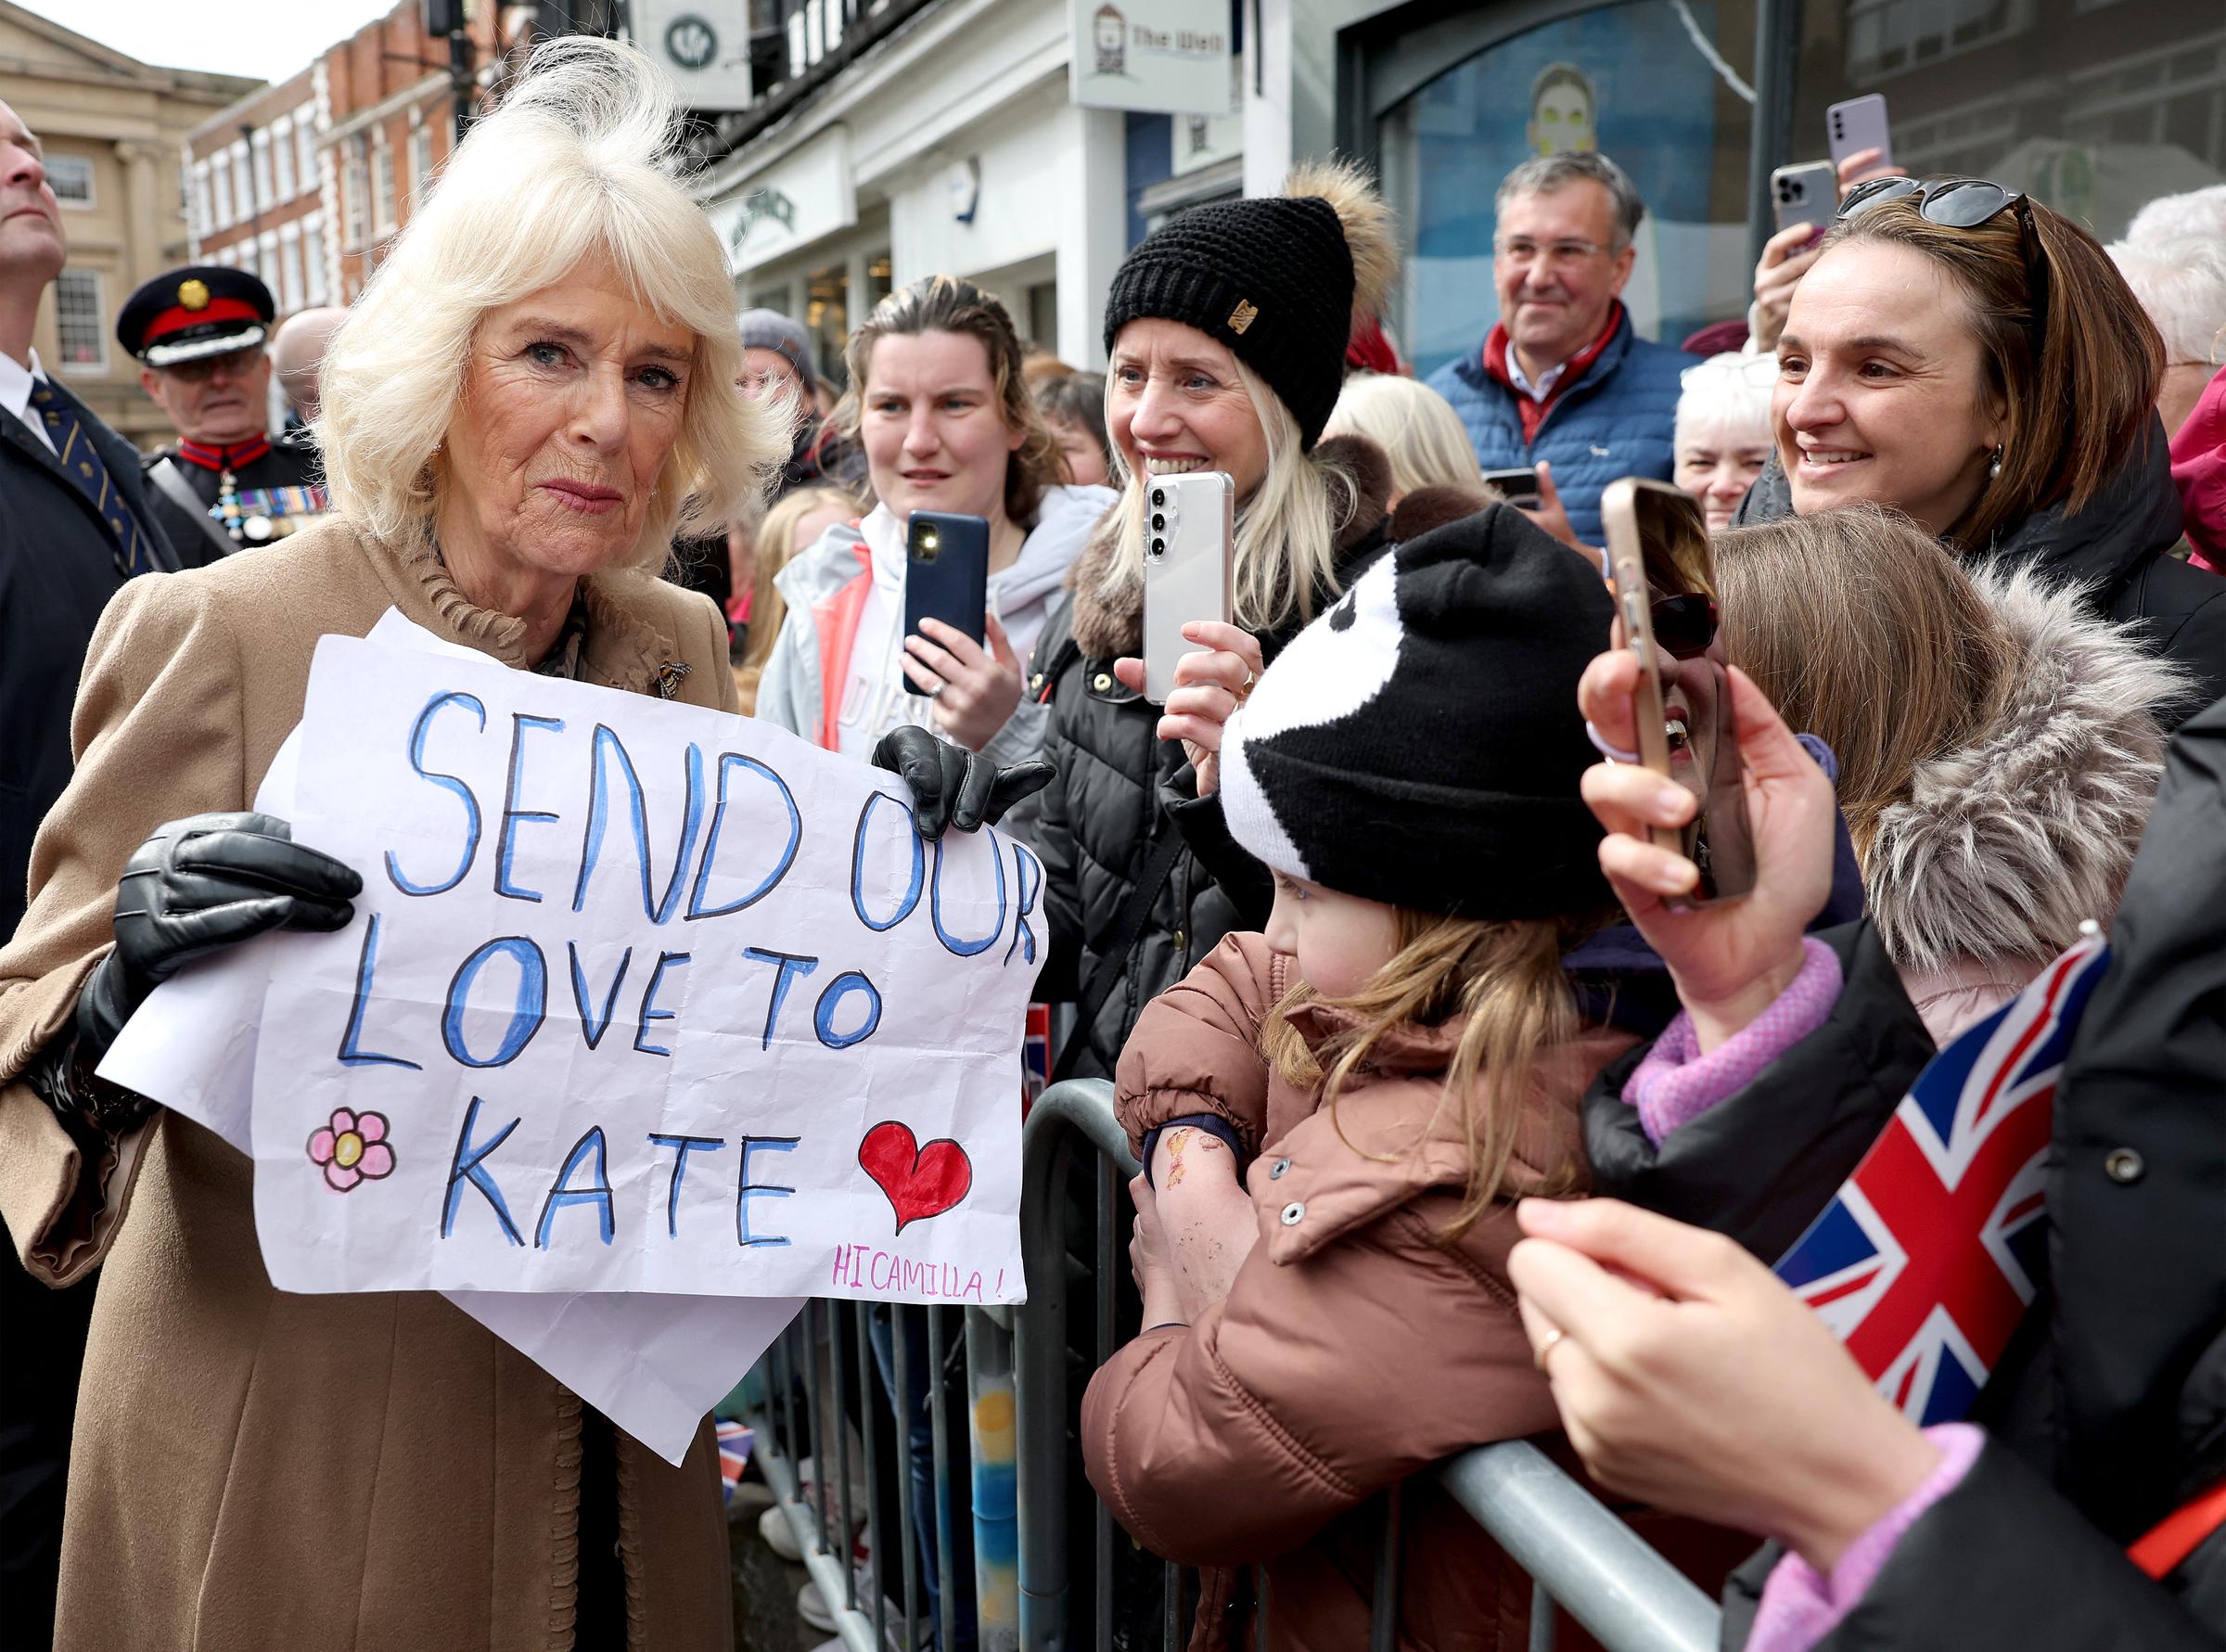 Queen Camilla holds a well-wishers' banner reading "Send our love to Kate" during her visit to the Farmers' Market in Shrewsbury, England on March 27, 2024. | Source: Getty Images